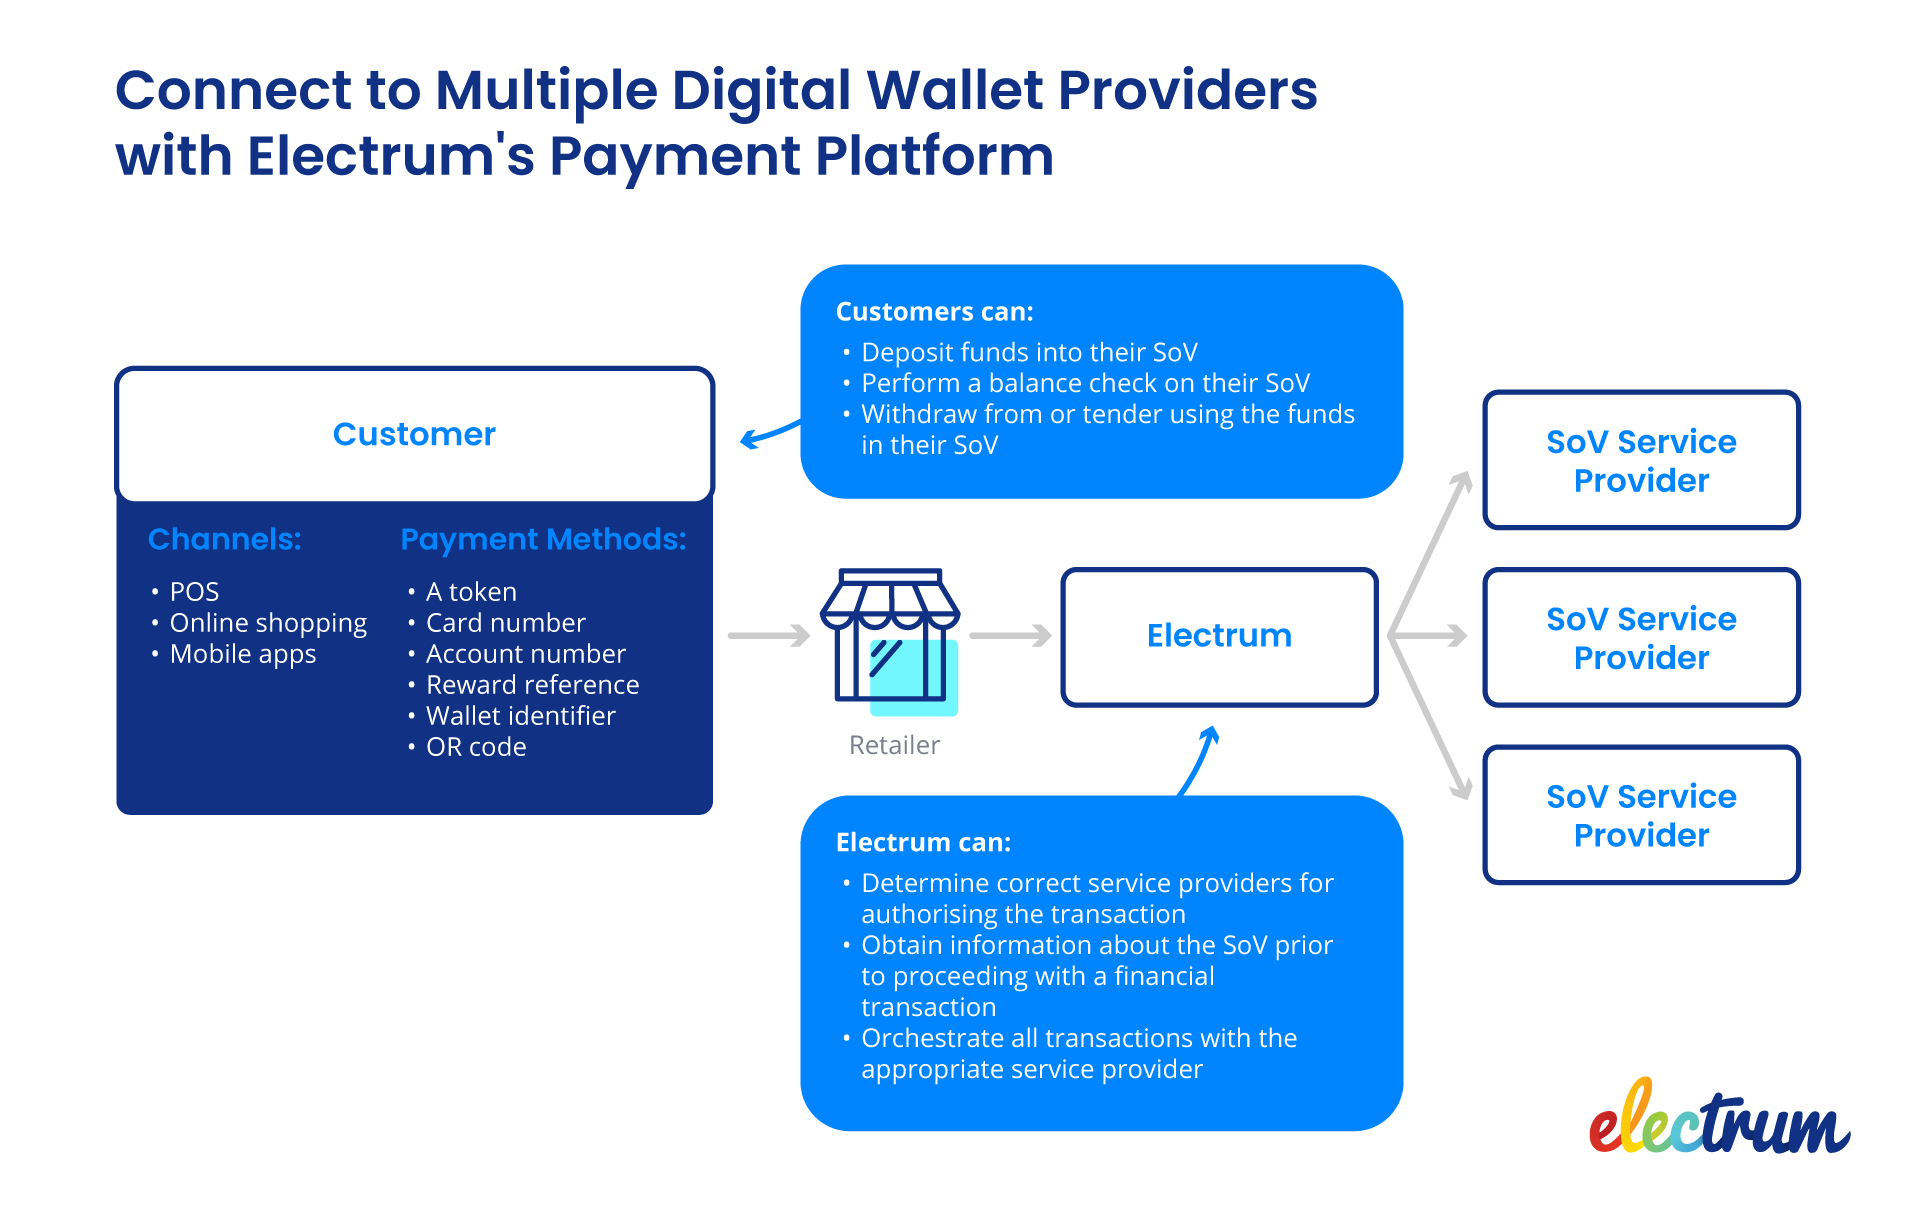 A business can connect to multiple digital wallet providers with Electrum's Payment Platform